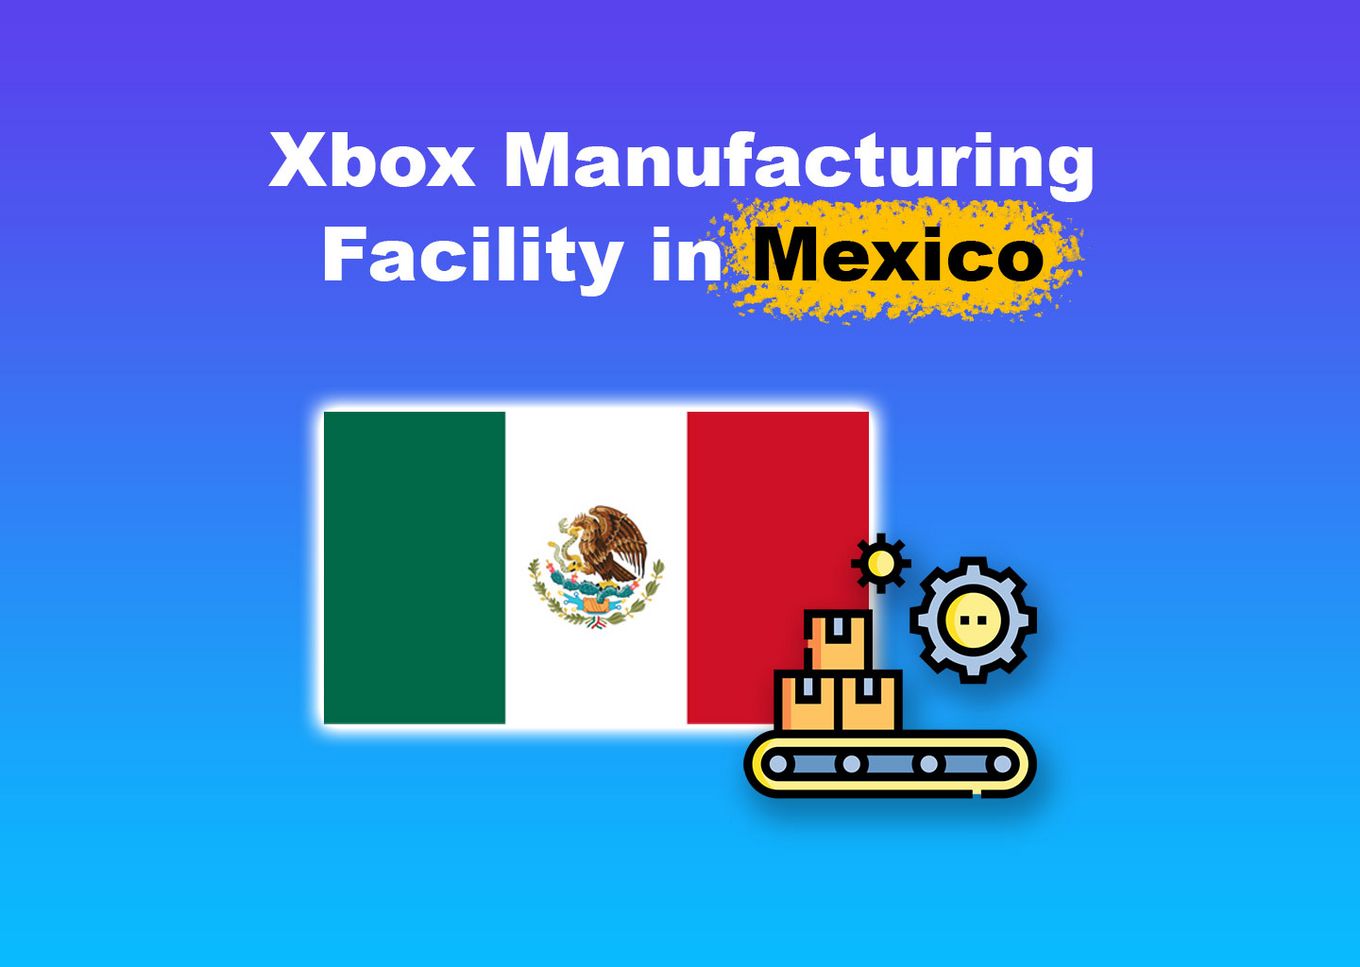 Xbox Manufacturing Facility in Mexico